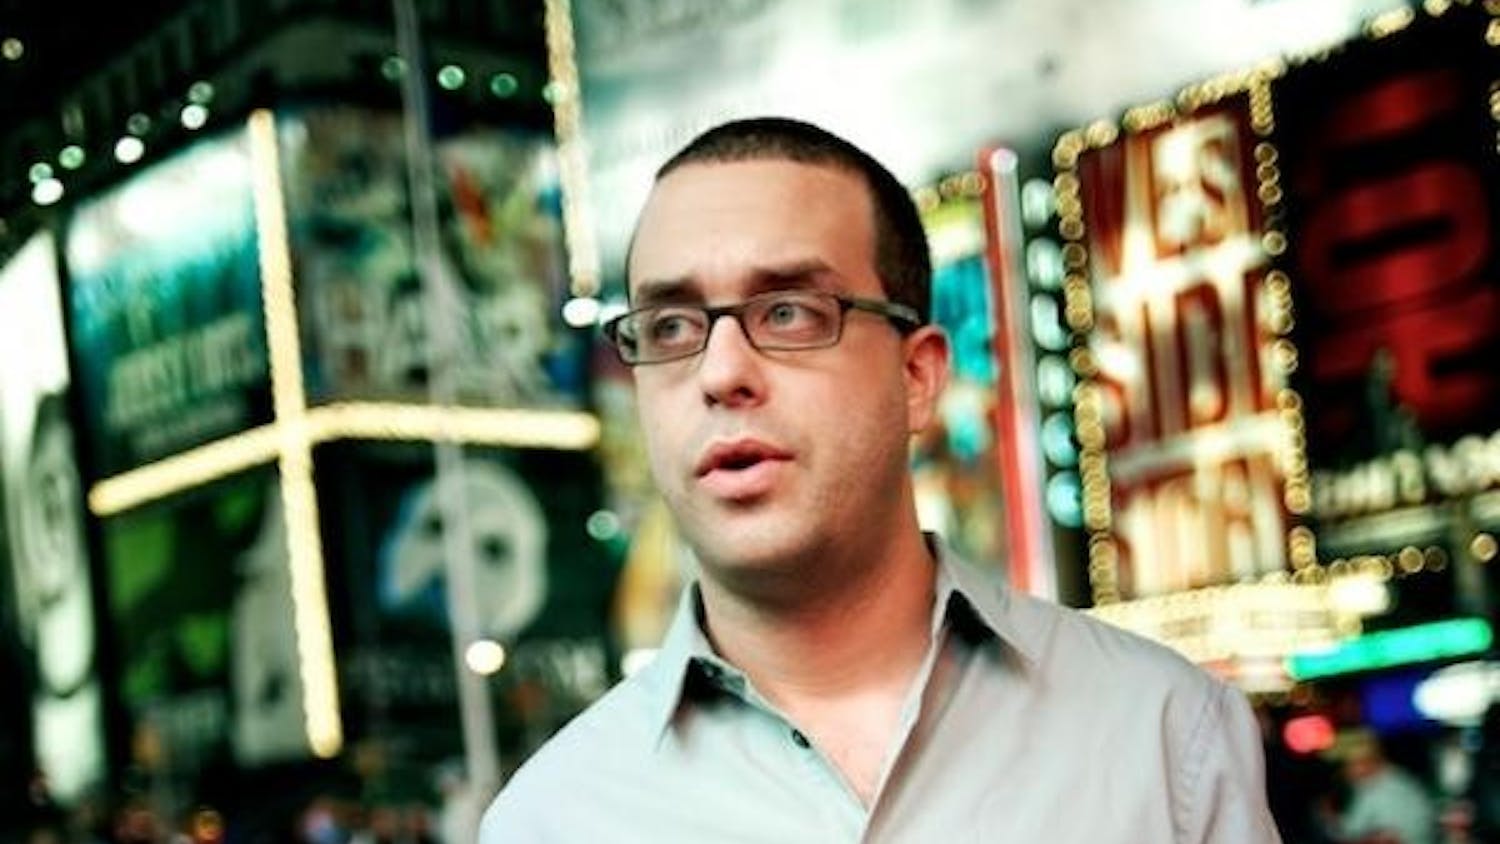 	In addition to writing and directing, Joe DeRosa has made appearances on FX&#8217;s &#8220;Louie&#8221; and HBO&#8217;s &#8220;Bored to Death.&#8221;